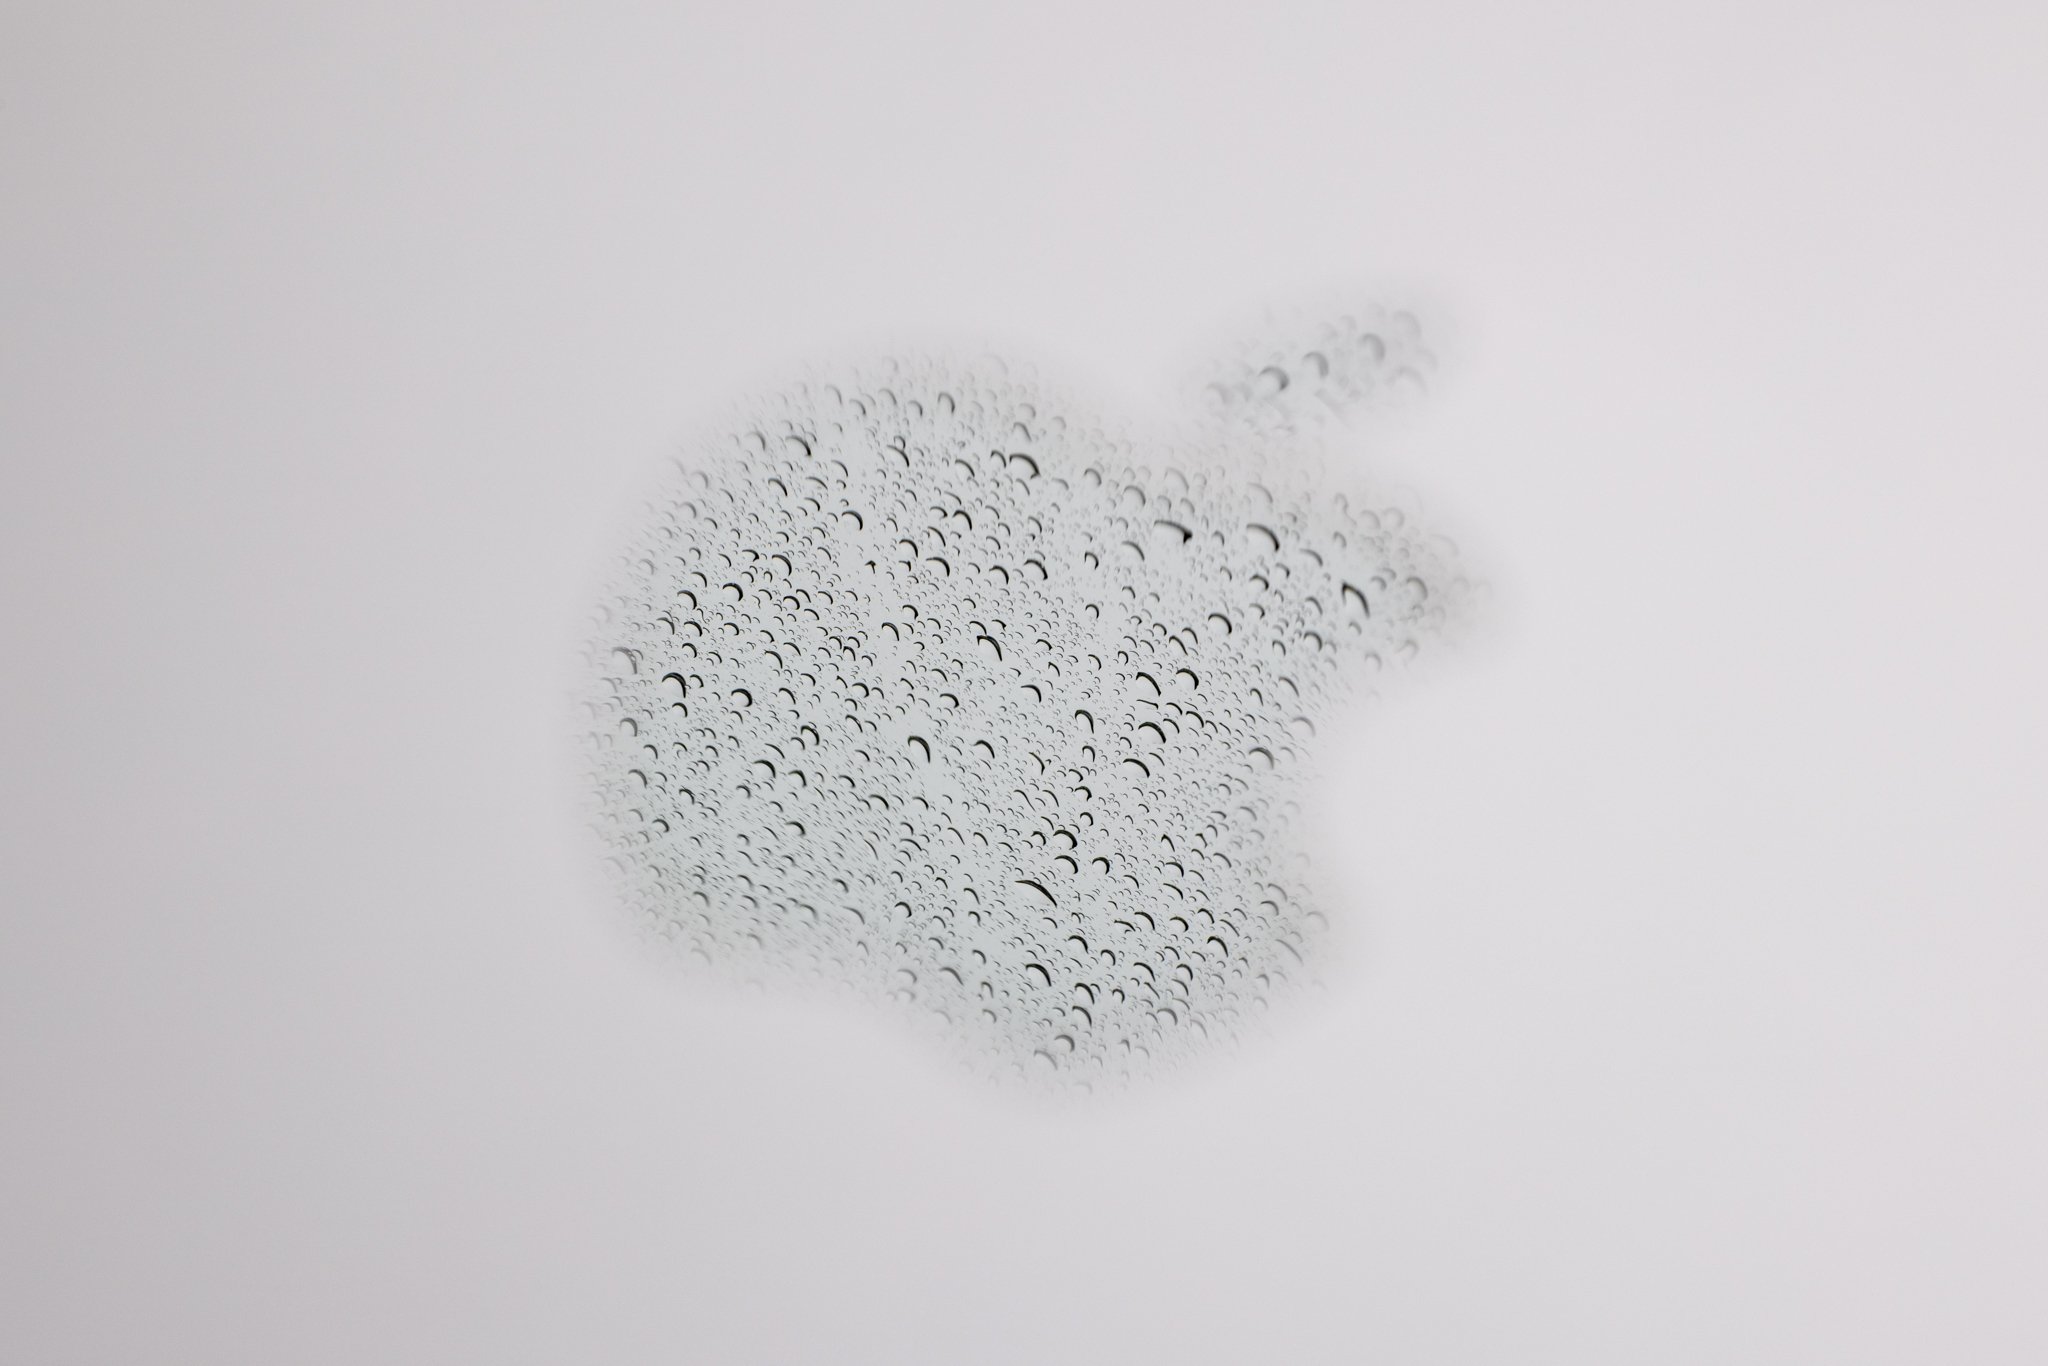 A reflection of rain in the Apple logo on a laptop photographed at f/14